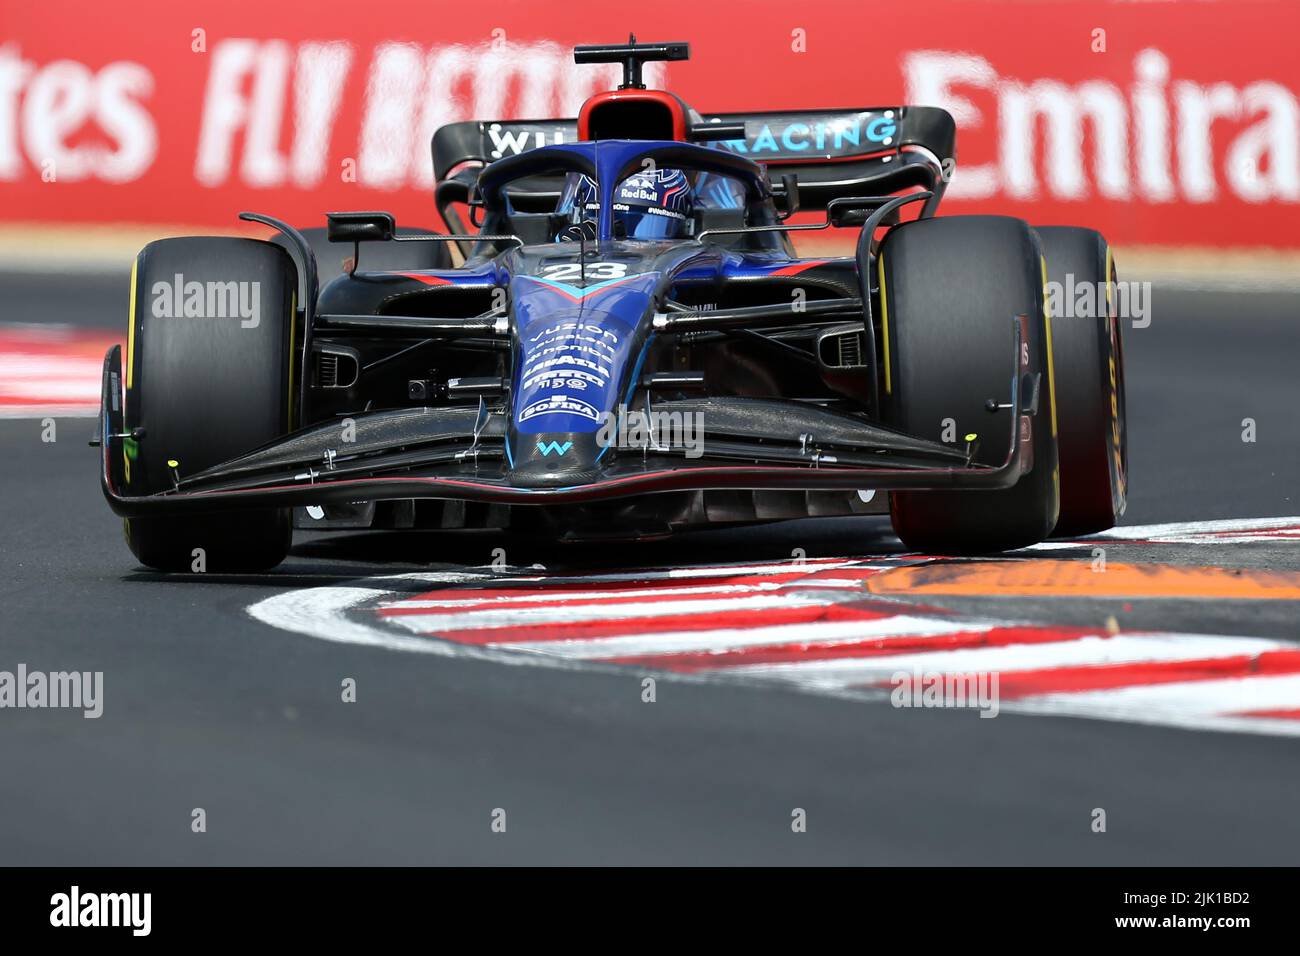 Alexander Albon of Williams  on track during free practice 1 ahead of the F1 Grand Prix of Hungary. Stock Photo